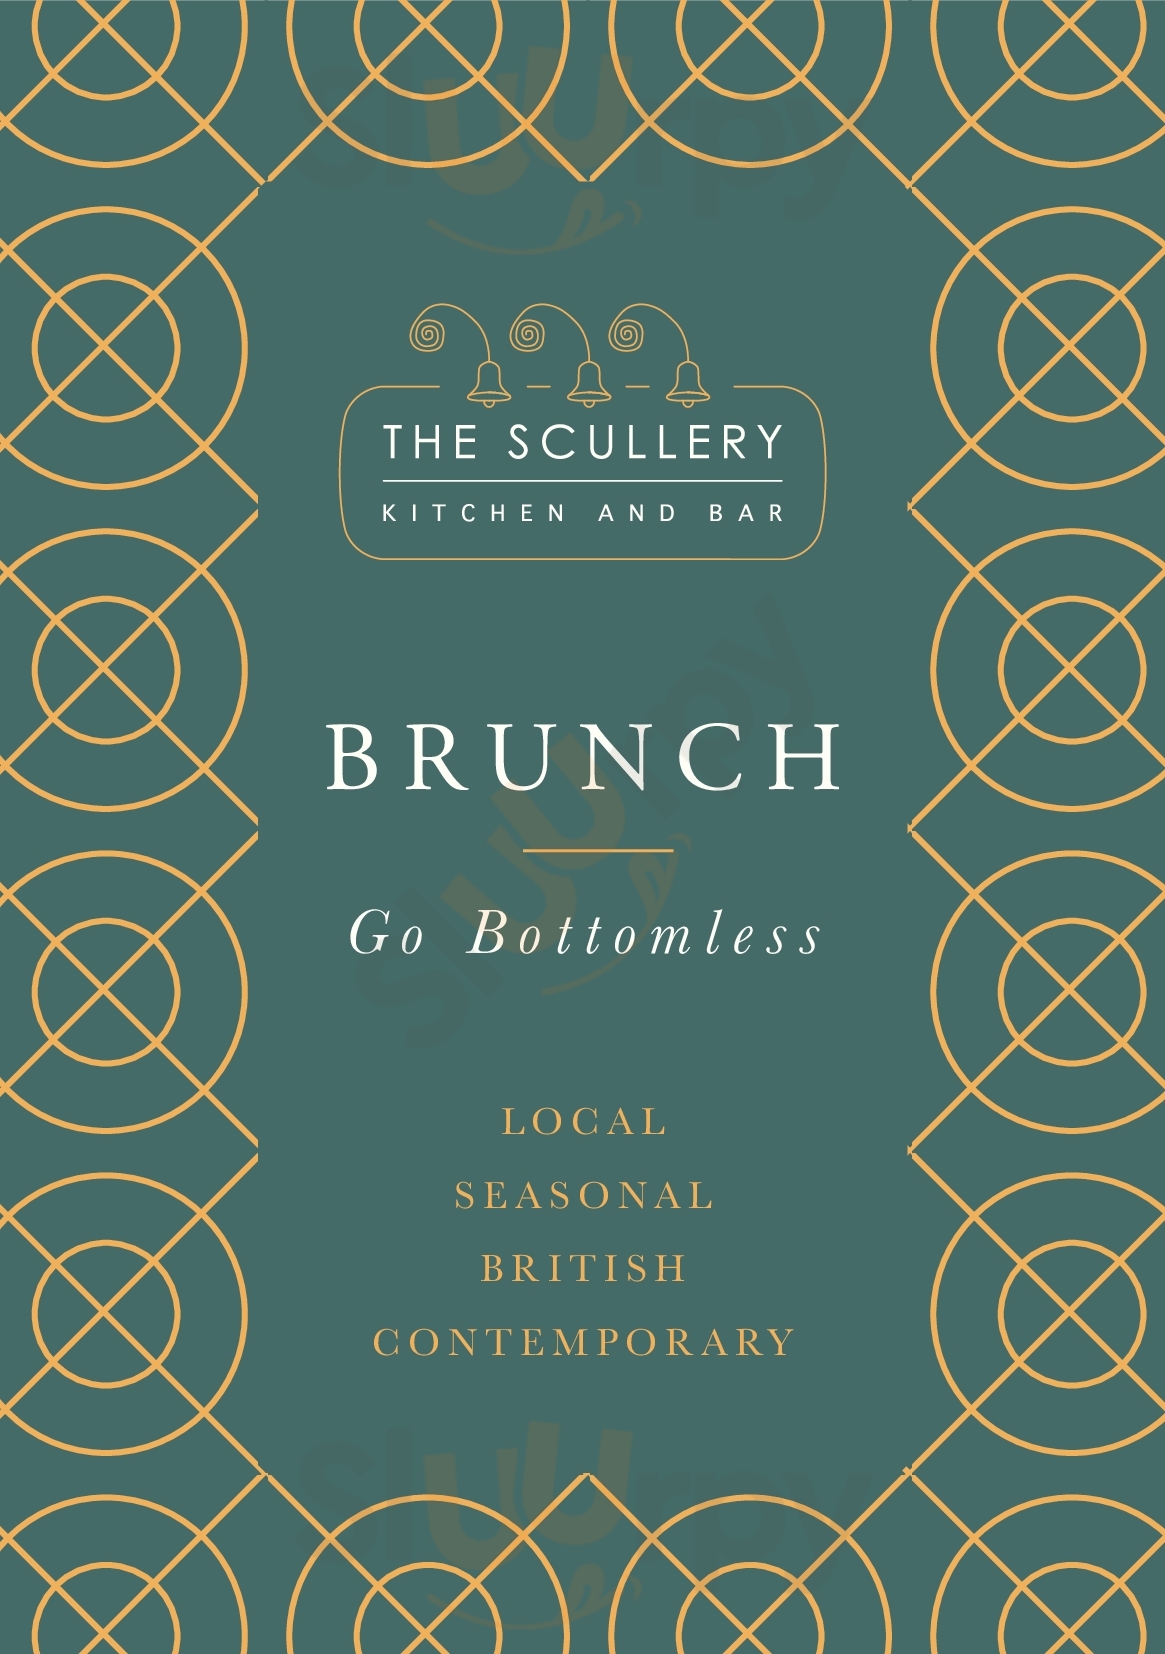 The Scullery Kitchen And Bar Huddersfield Menu - 1